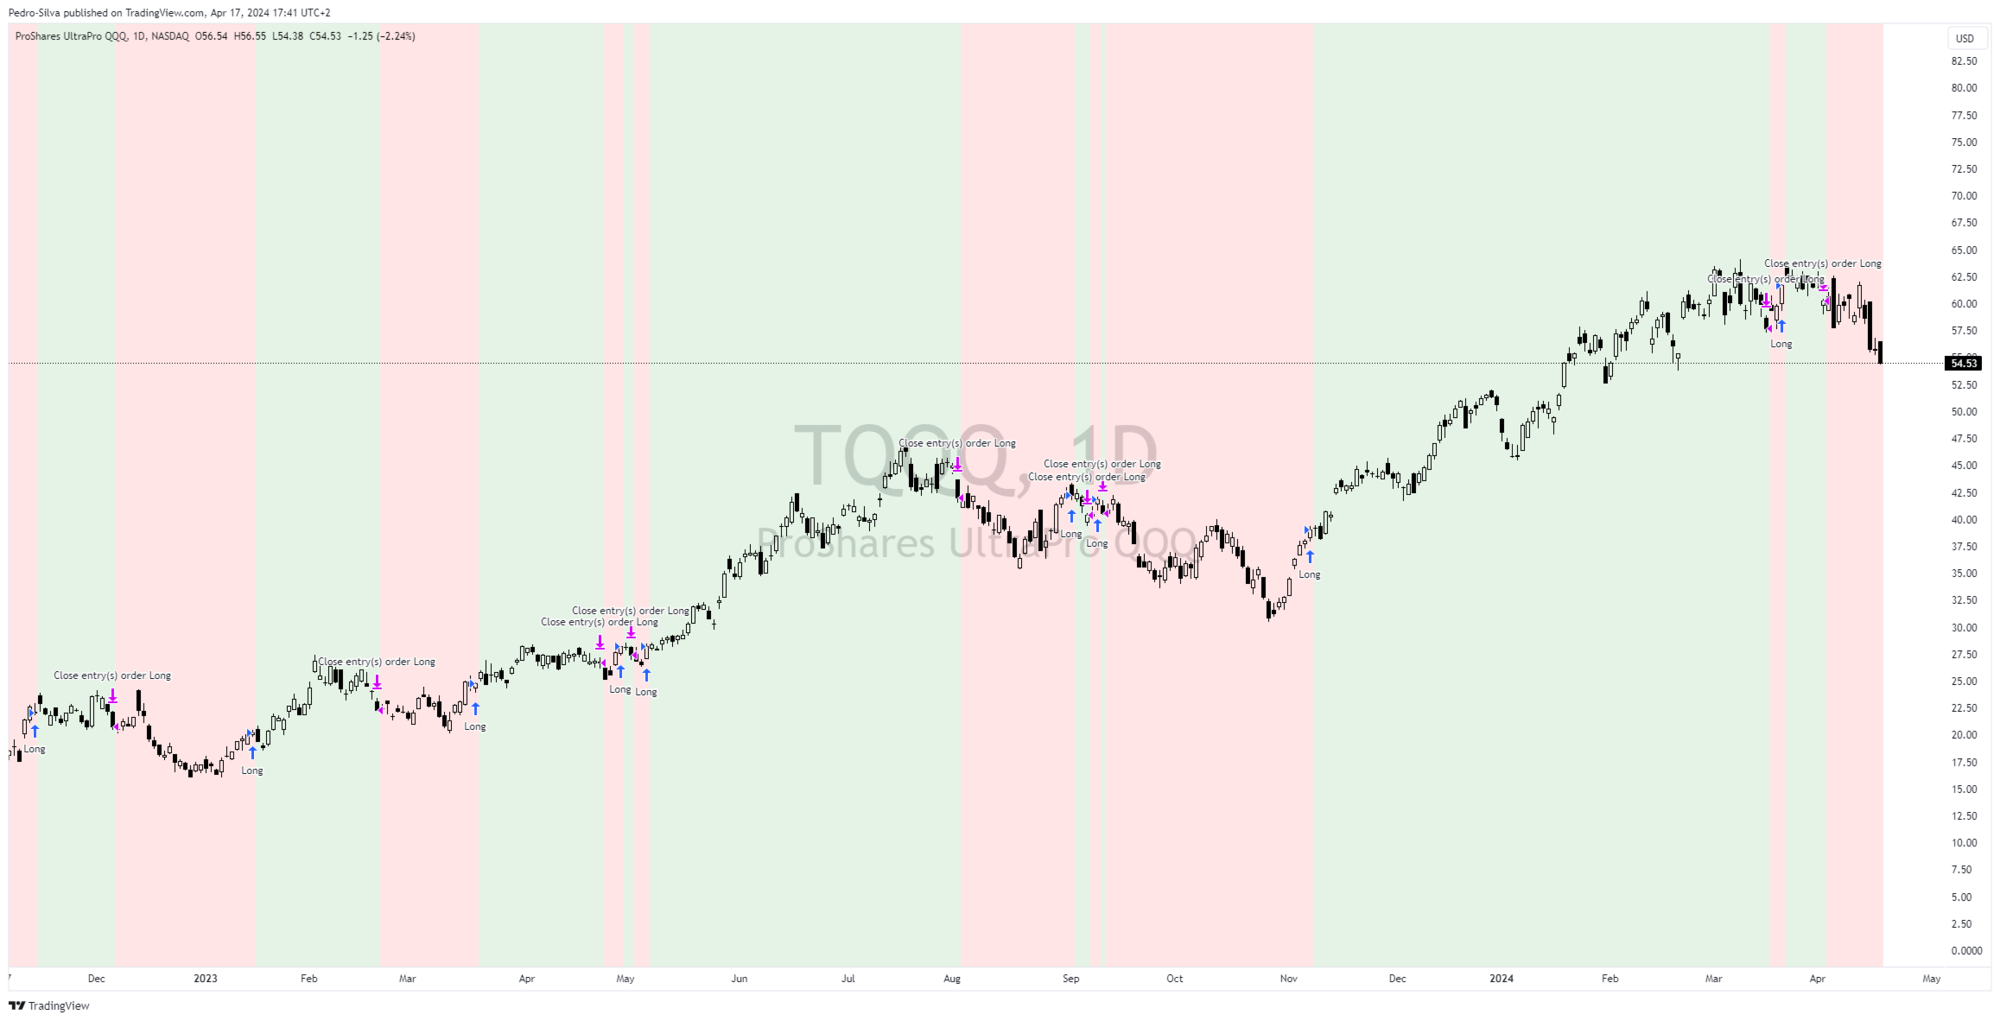 Chart of TQQQ ETF continues to show that Alpha Signals strategy remains firmly on a red signal.